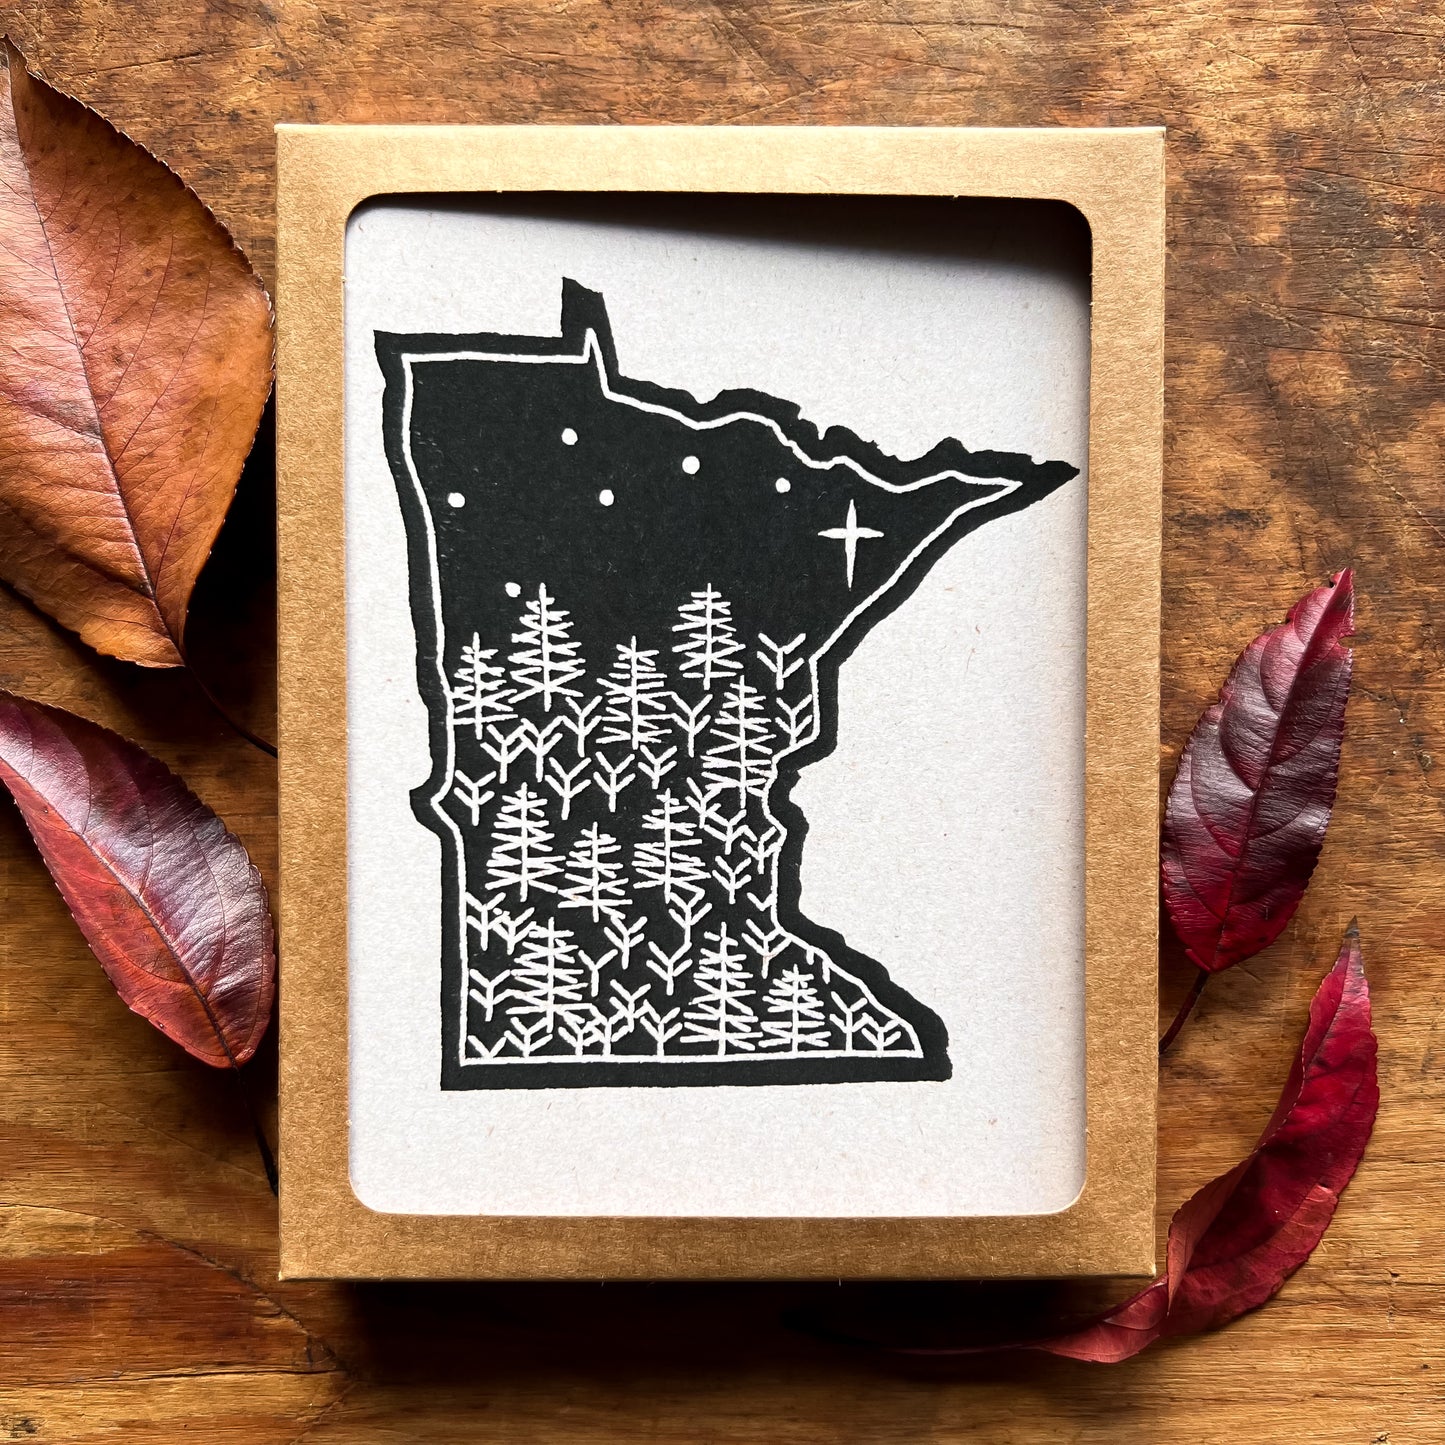 North Star State Greeting Cards | Blank Inside, A2, Recycled